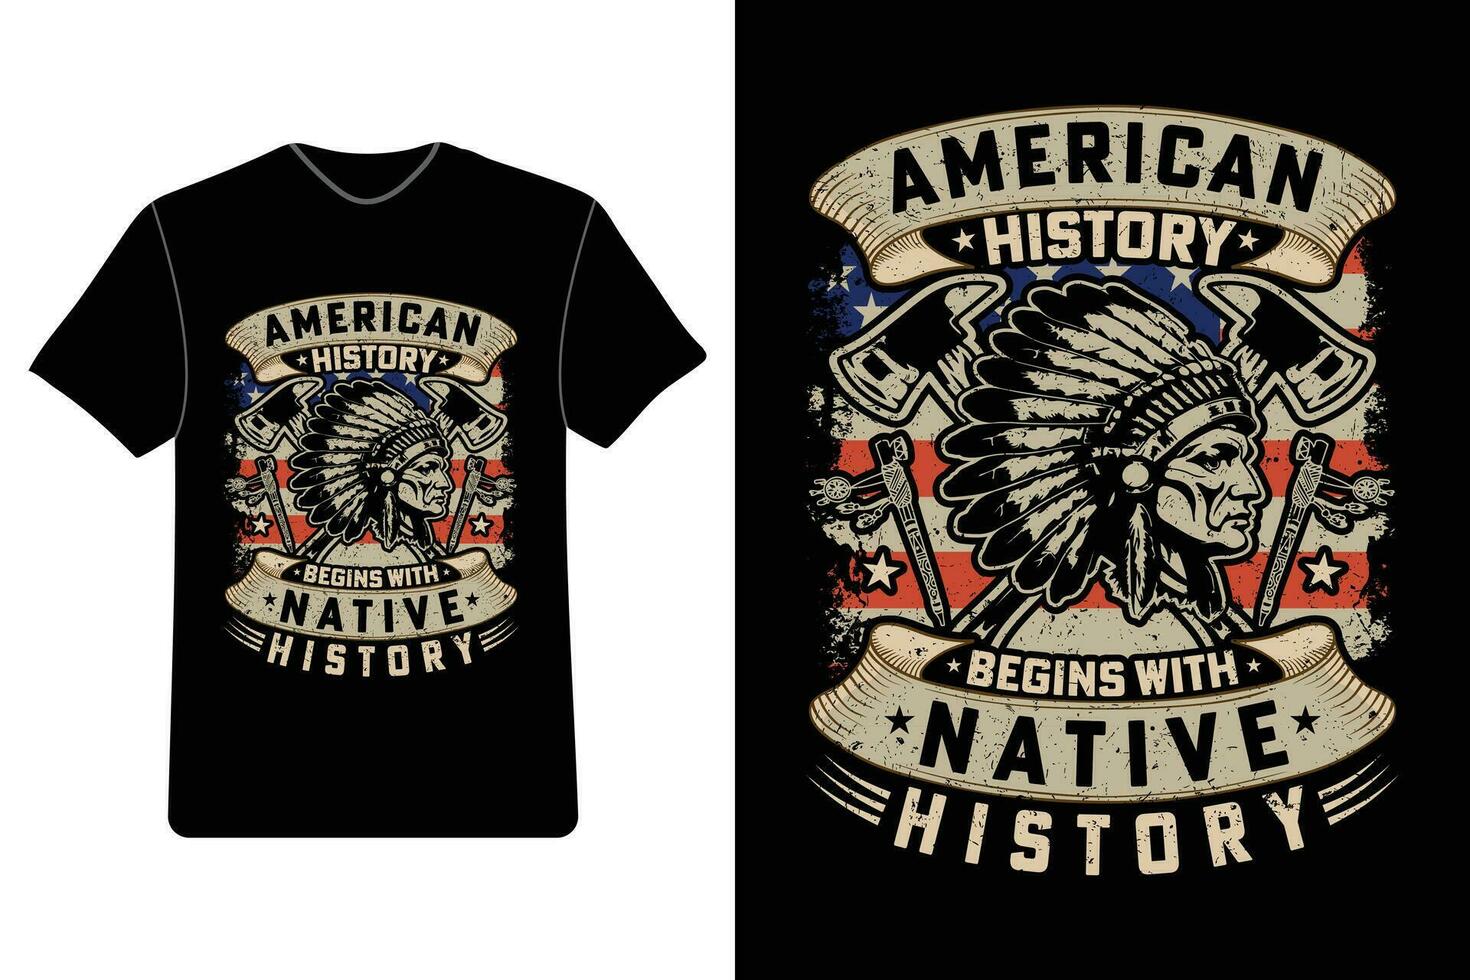 American History Begins with Native History, Native American T-Shirts, Native American Pride Shirts. vector